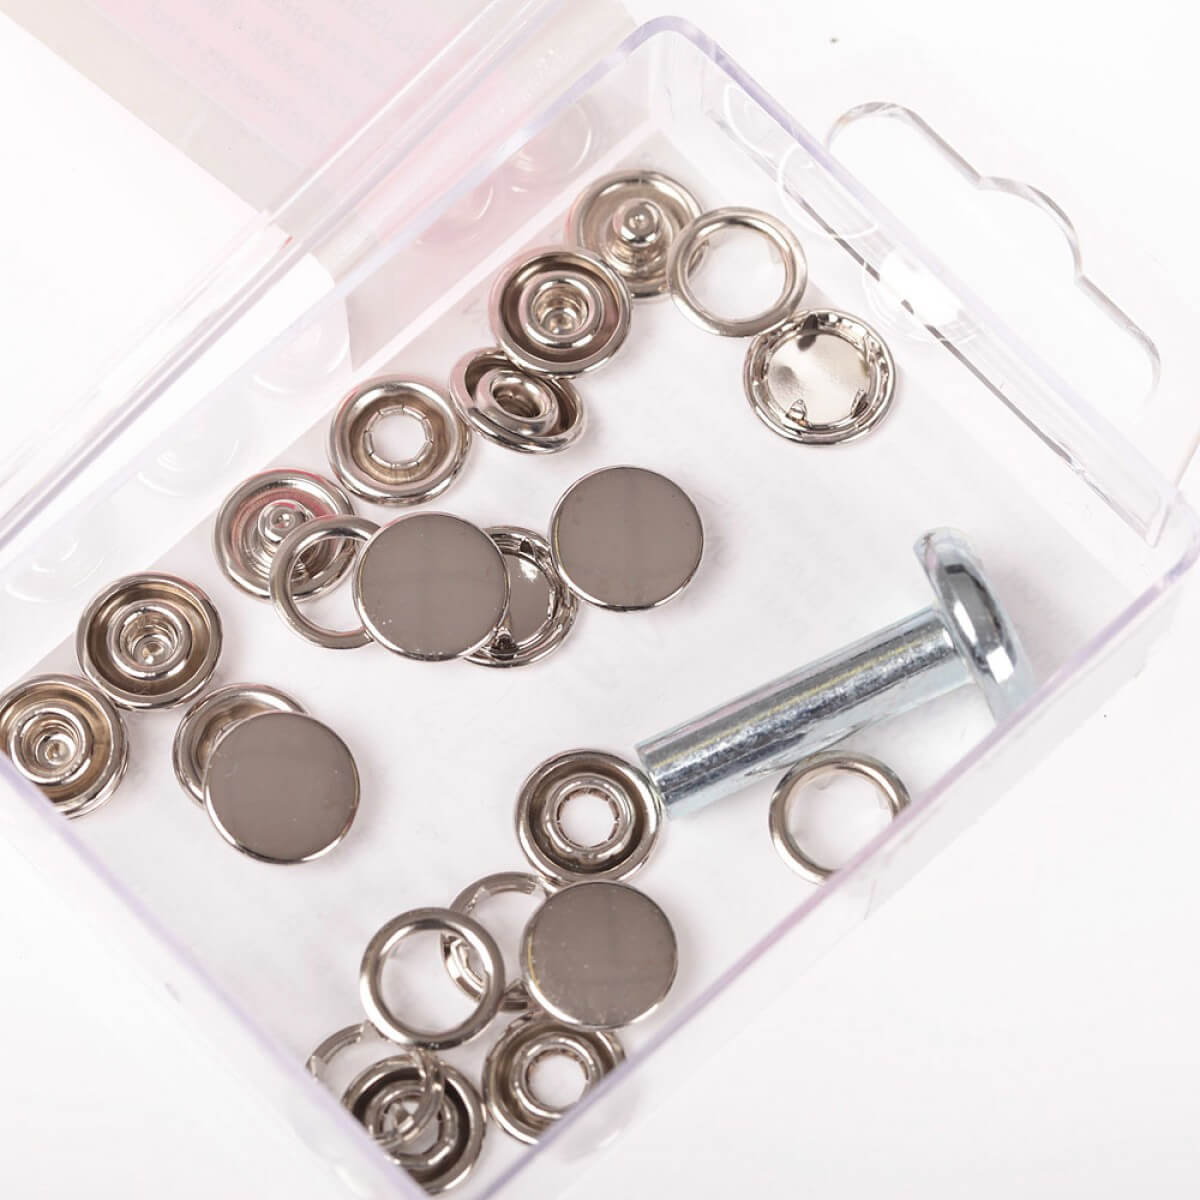 Boutons pressions métal rond - 11,5mm - Or - Accessoires Couture